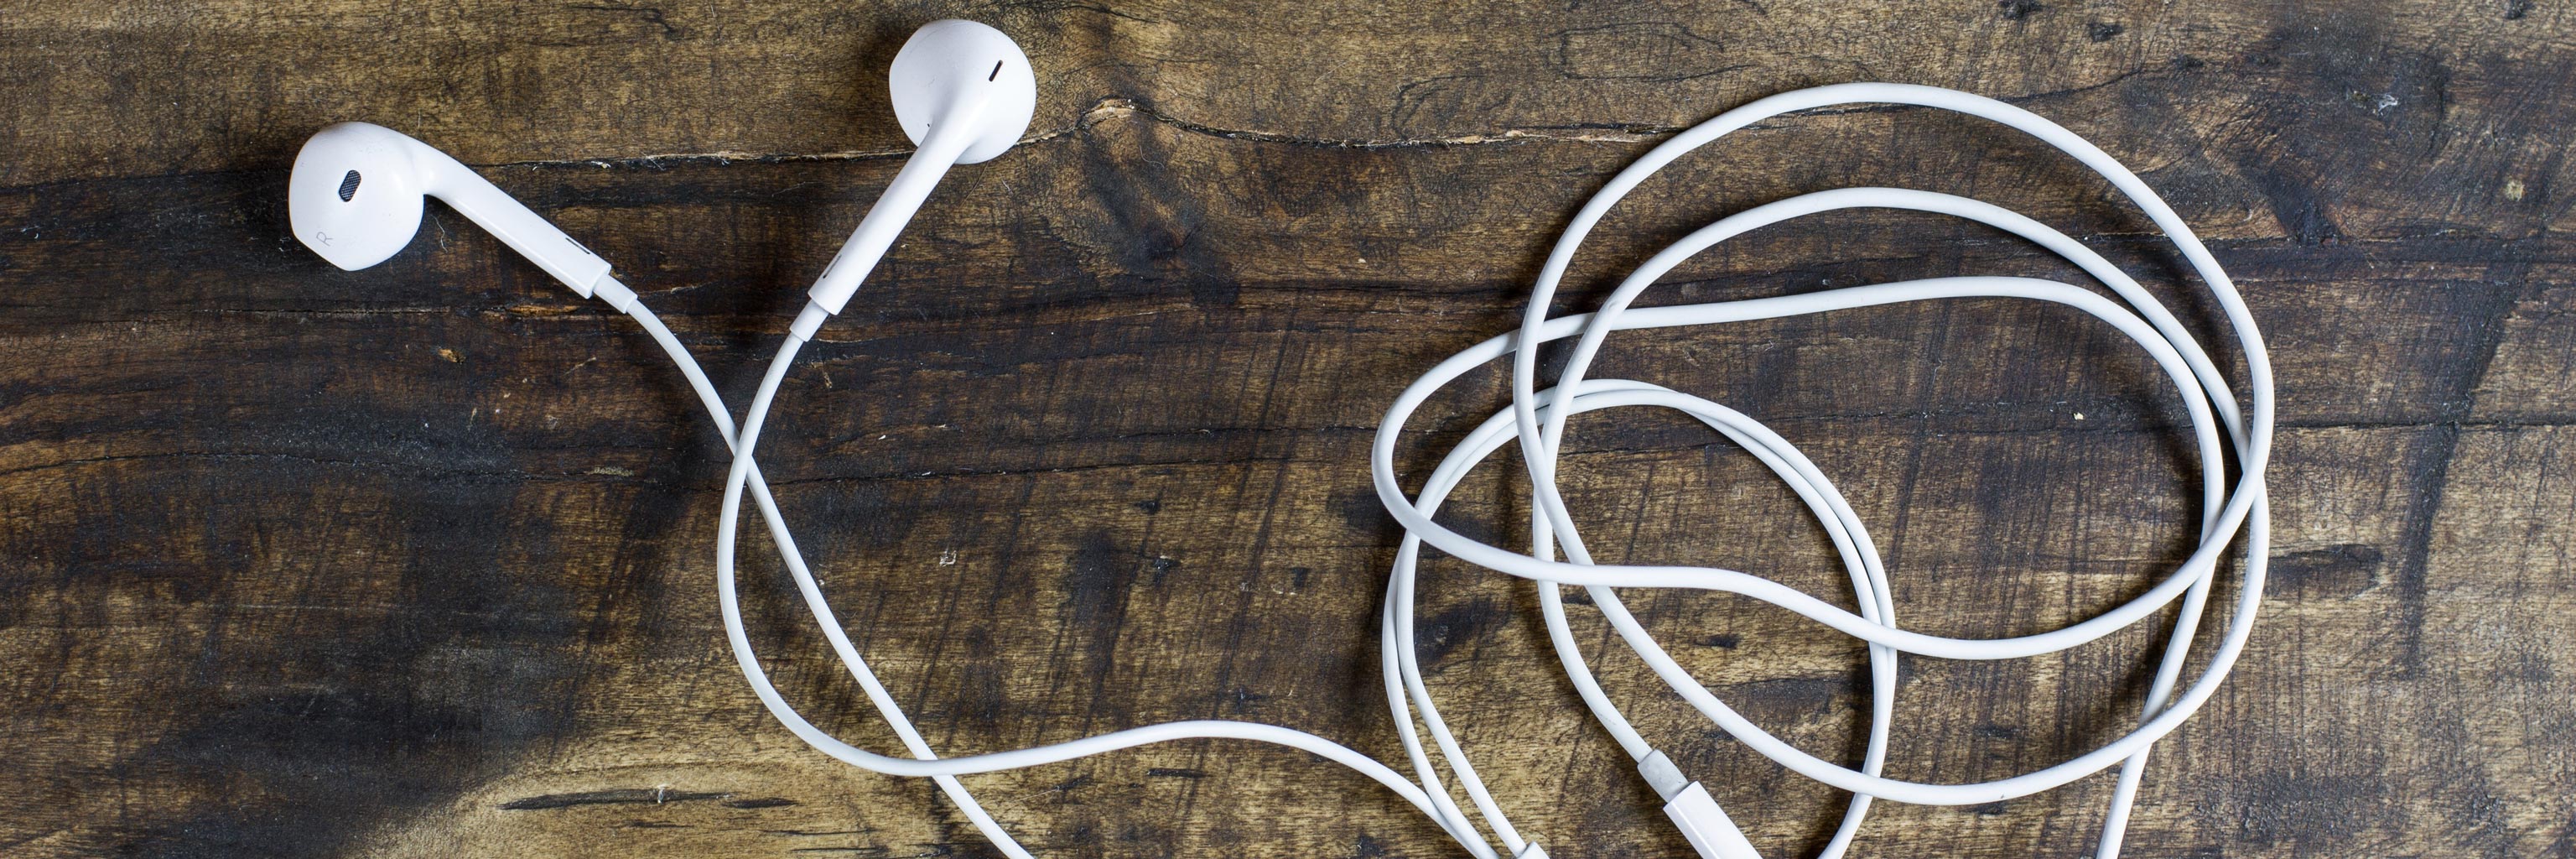 A pair of white earphones lying on a wooden surface